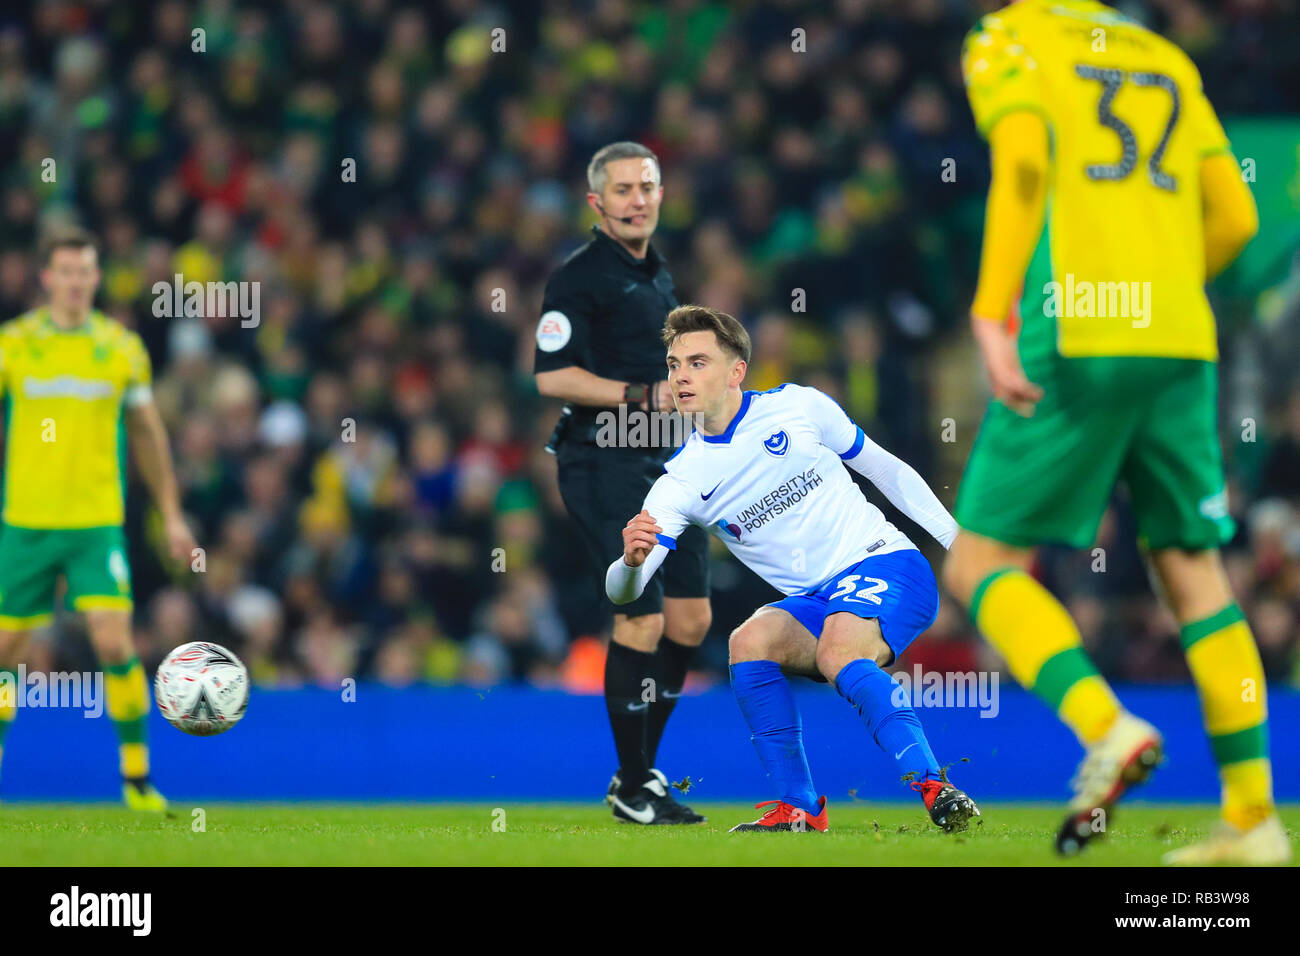 5th January 2019, Carrow Road, Norfolk, England; The Emirates FA Cup, 3rd Round, Norwich City vs Portsmouth ; Ben Thompson (32) of Portsmouth makes a pass.  Credit: Georgie Kerr/News Images  English Football League images are subject to DataCo Licence Stock Photo